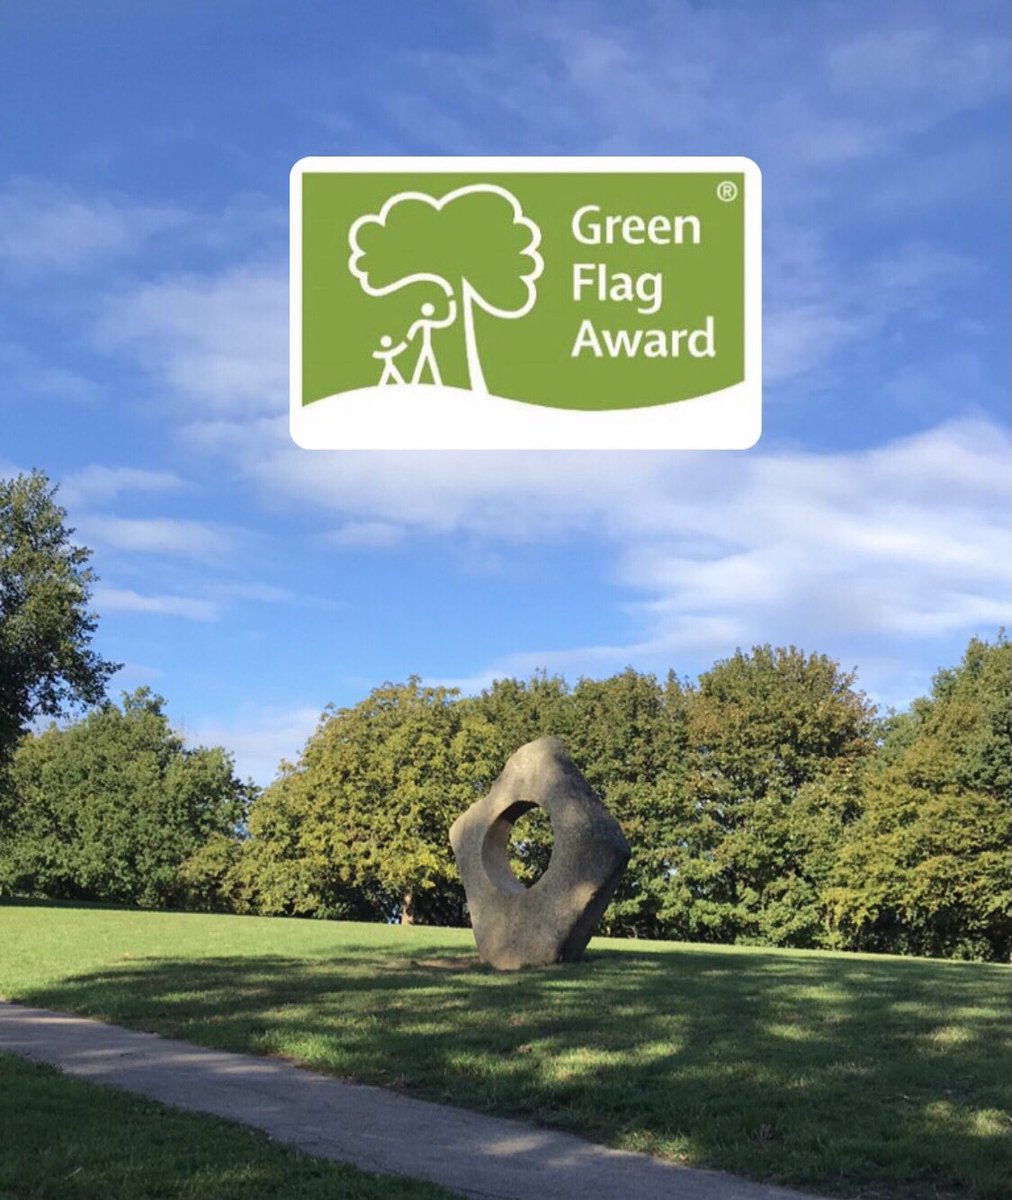 Broomhill Park has received a Green Flag Award 2020 🥳🙌 brilliant news! #greenflag #wearemedway #greenspaces #parks #loveyourpark #localgreenspace #broomhillpark #medway